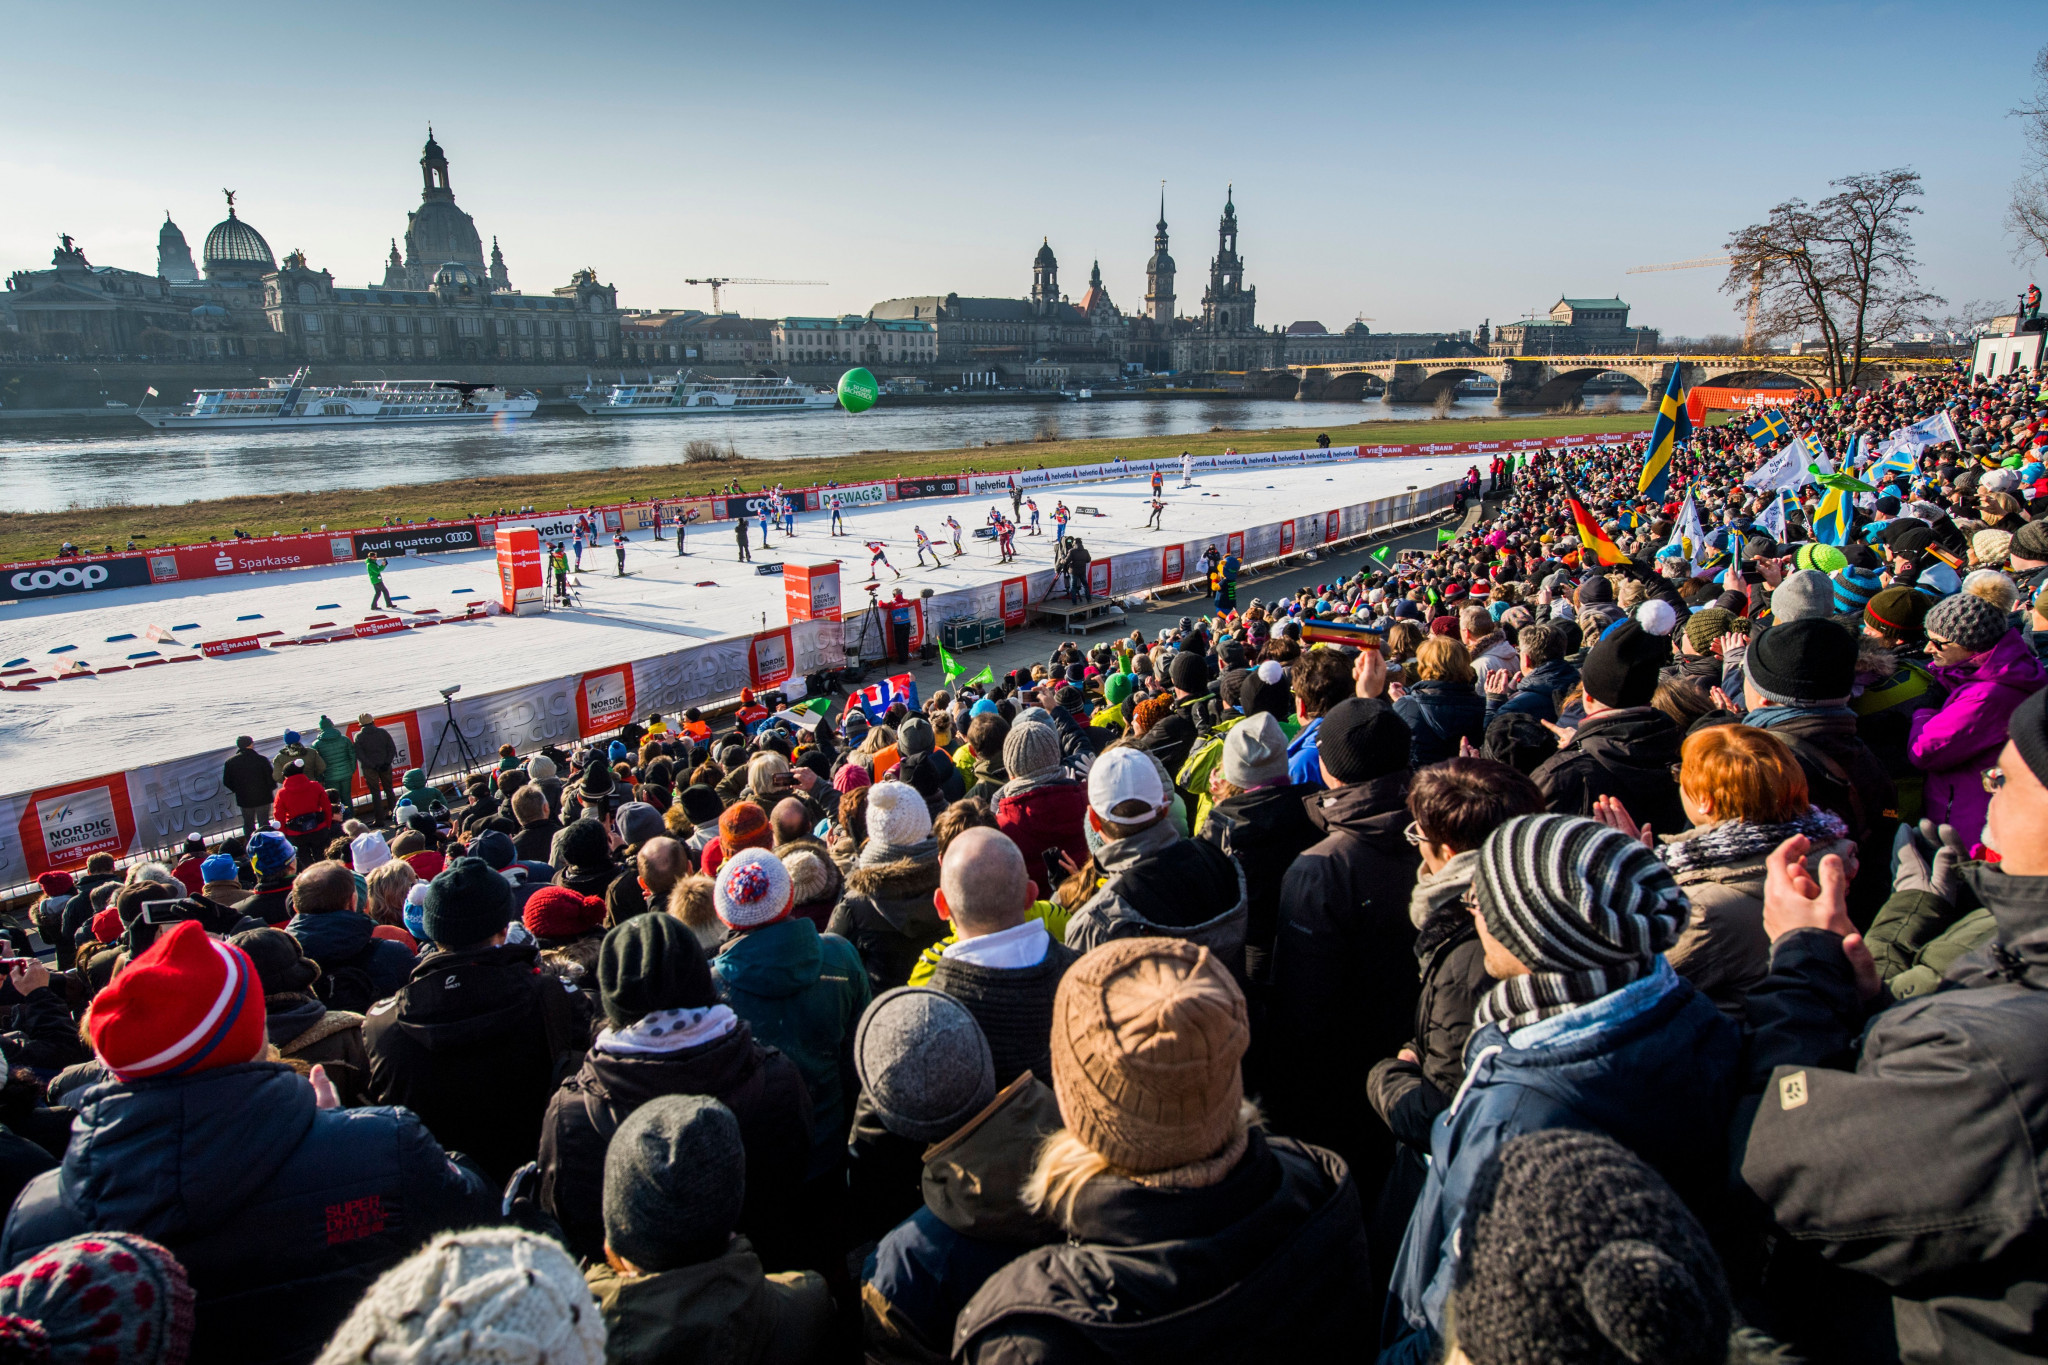 German city Dresden will host the next stage of the FIS Cross Country World Cup circuit starting with sprint action tomorrow ©Getty Images